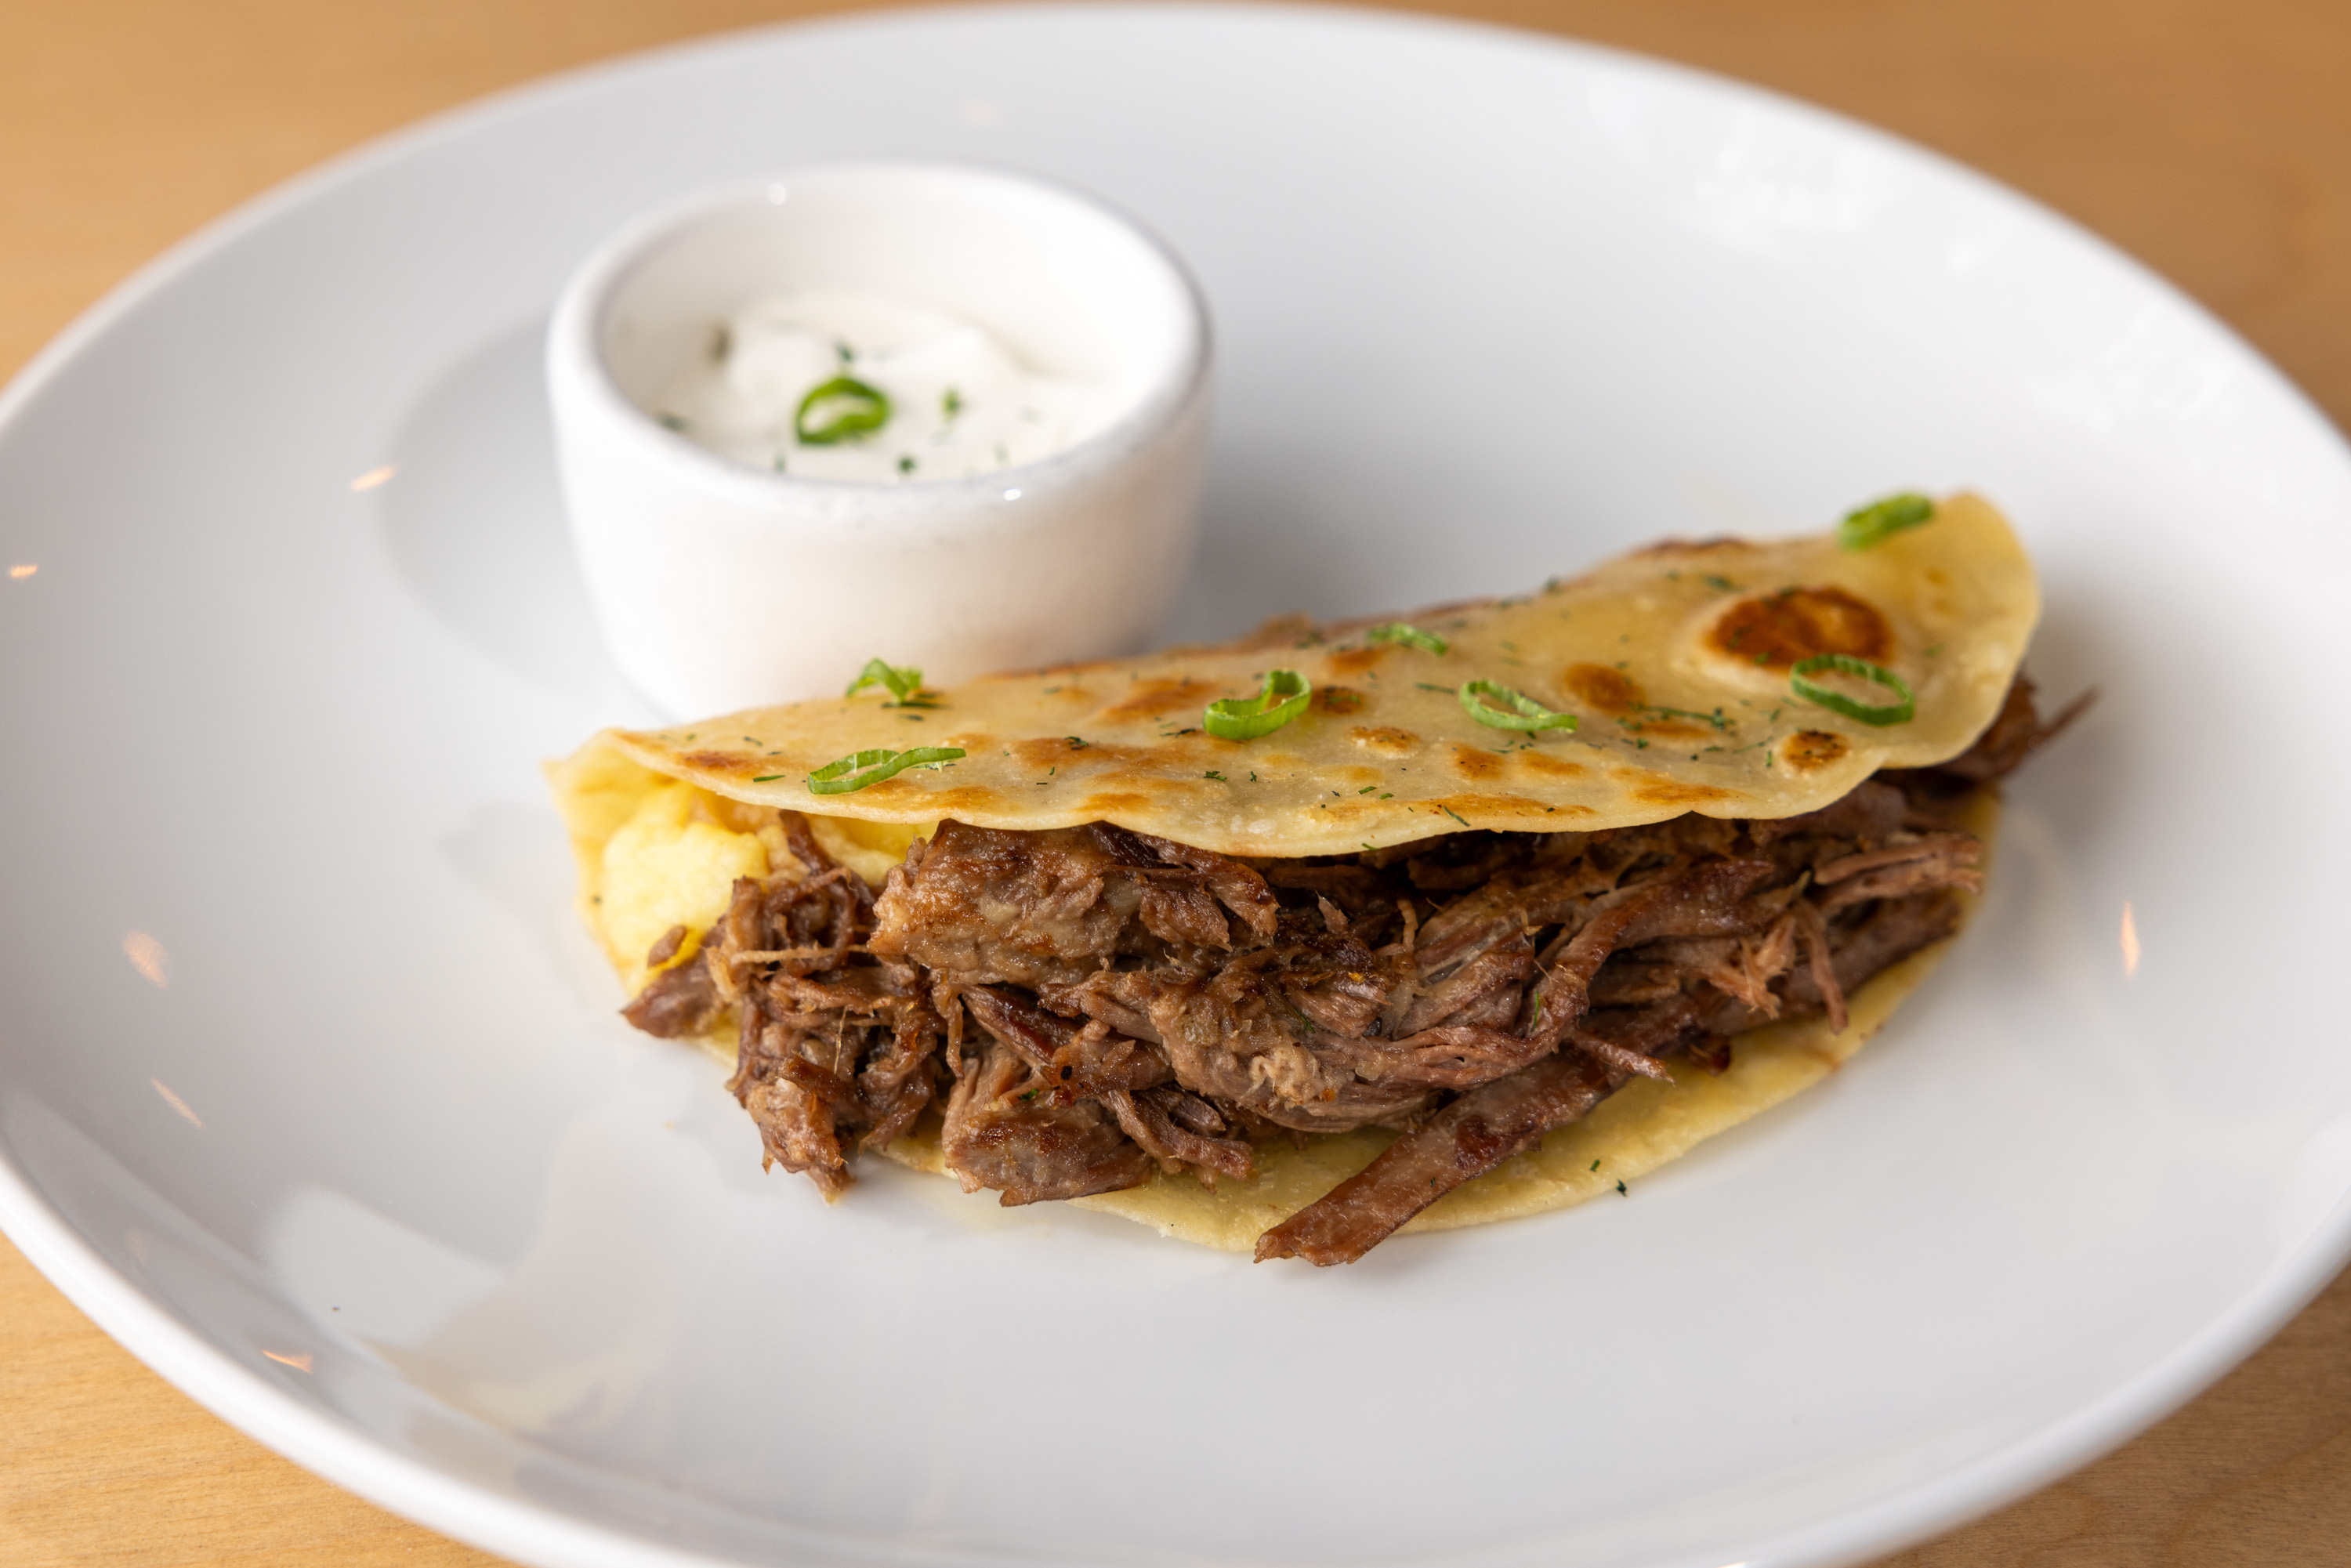 A quesadilla with shredded meat and cheese on a plate with a cup of sauce.